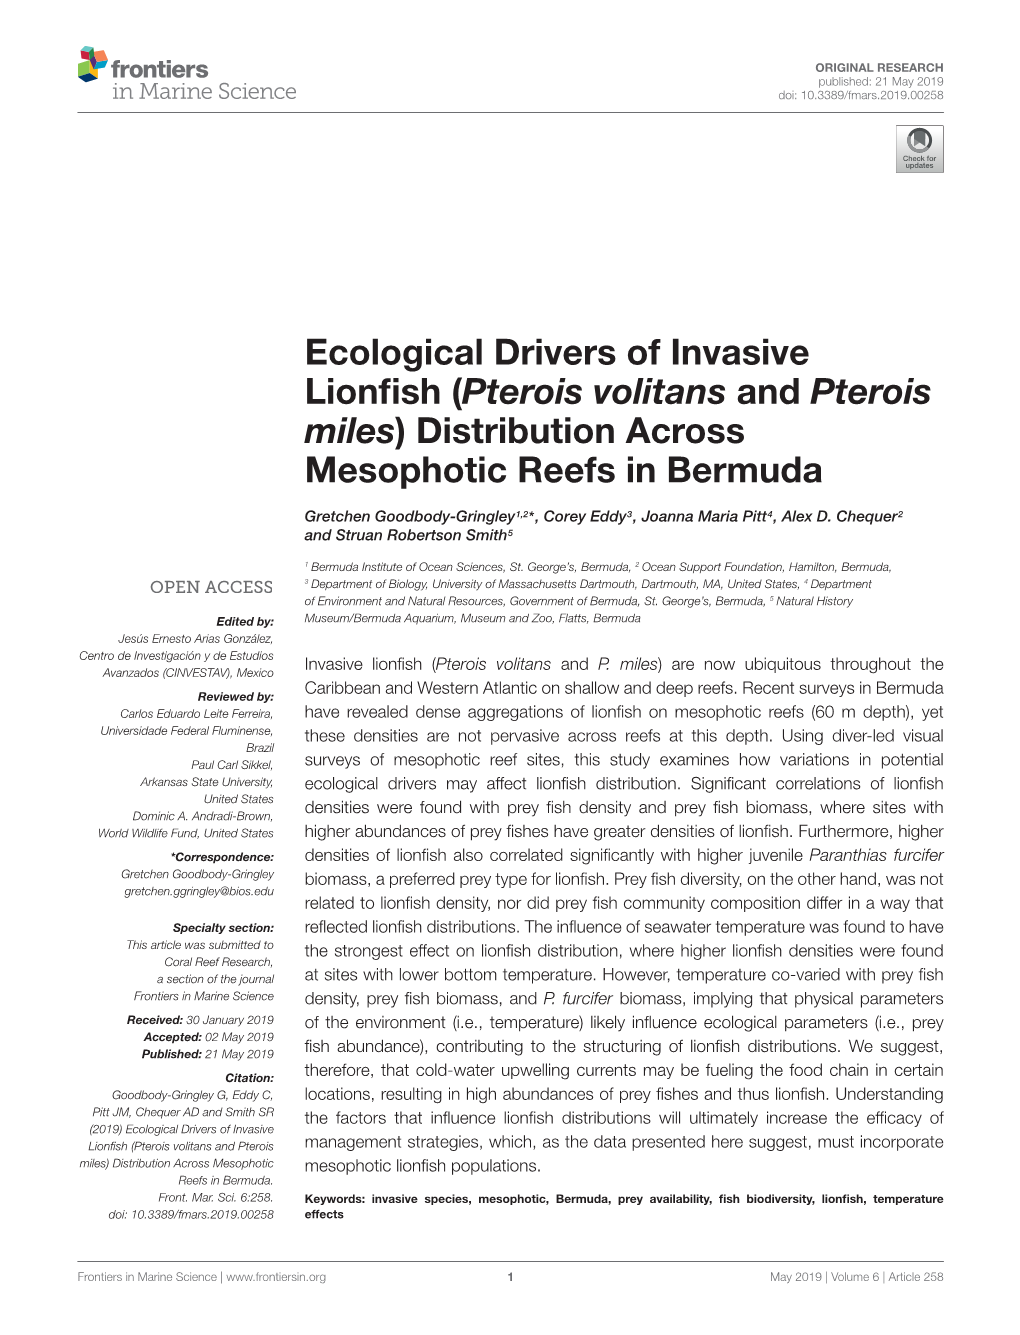 Ecological Drivers of Invasive Lionfish (Pterois Volitans and Pterois Miles